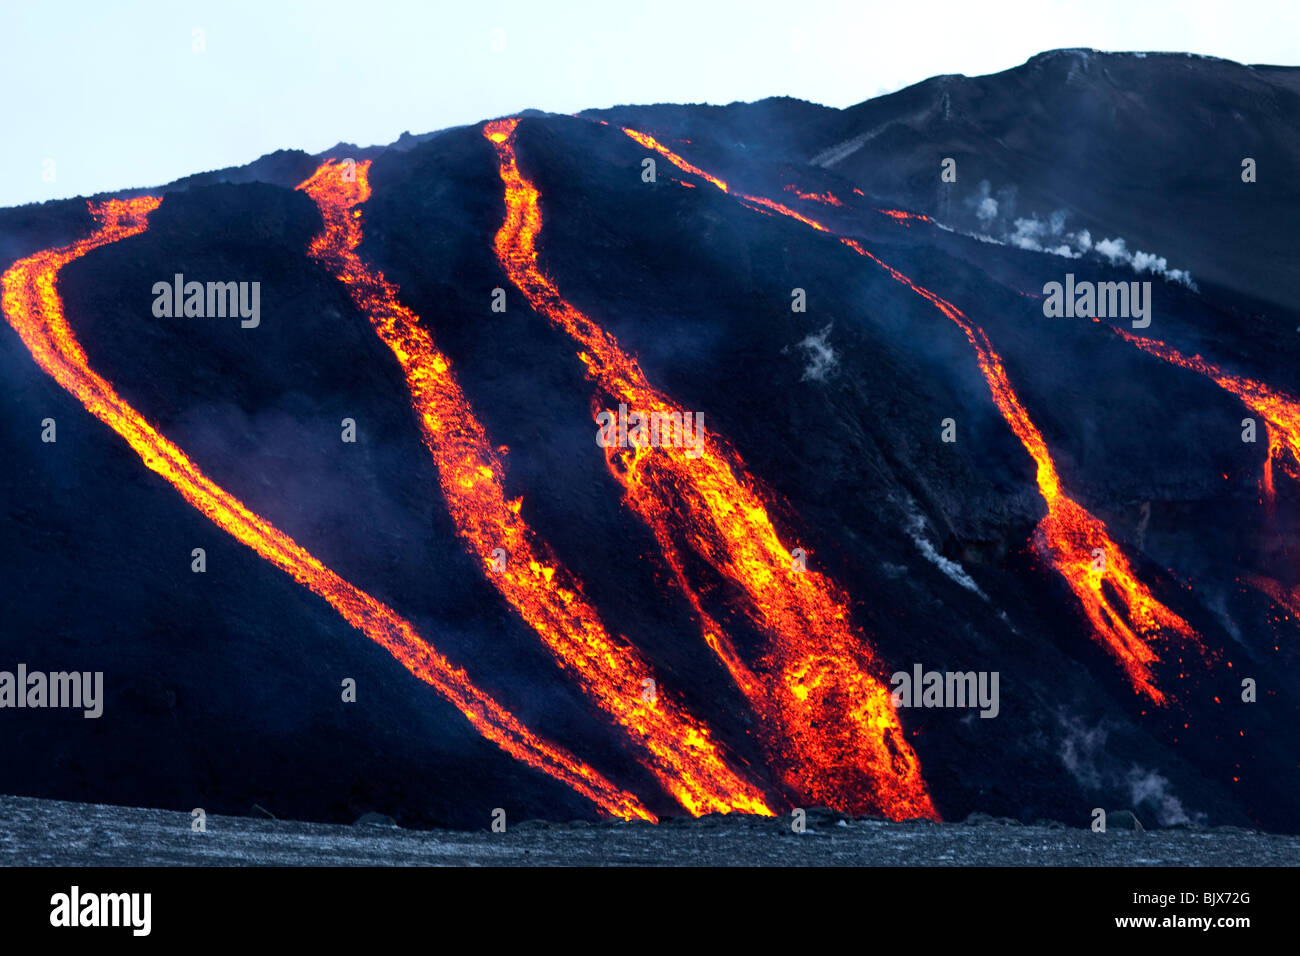 Volcanic eruption at Fimmvorduhals Iceland - Floating lava in streams Stock Photo